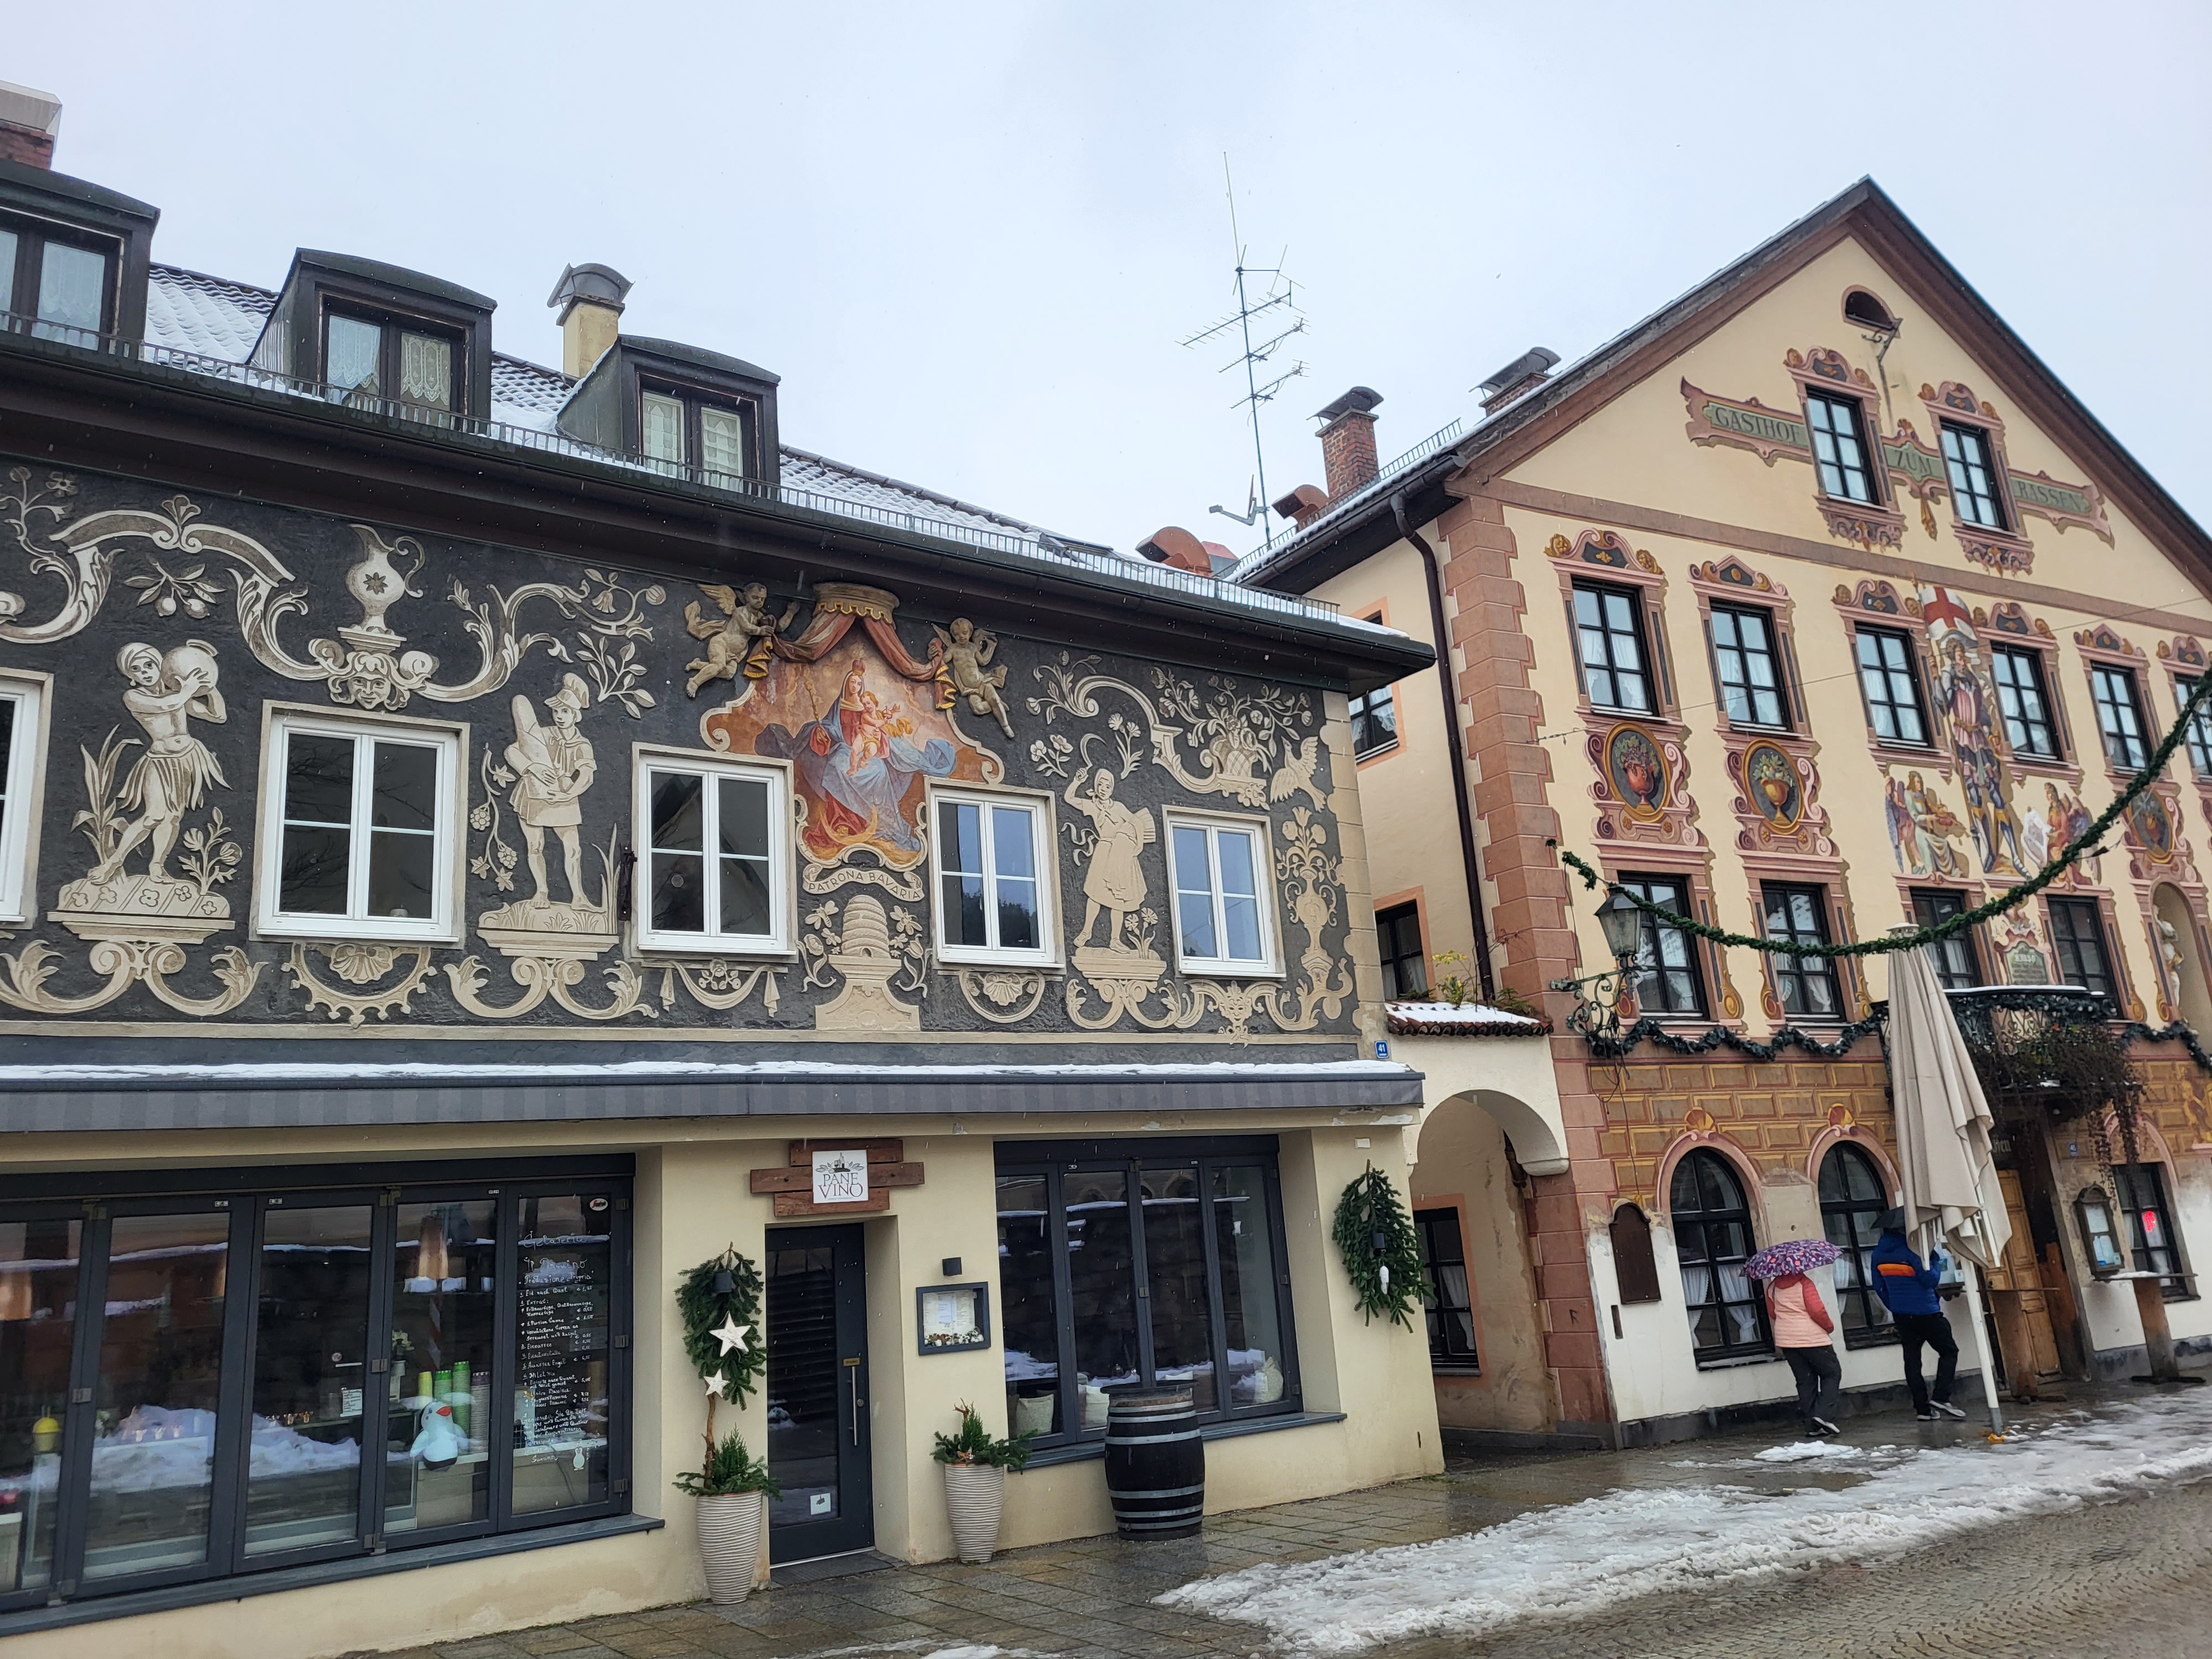 Olympics & Painted Houses in Garmisch-Partenkirchen {Germany}